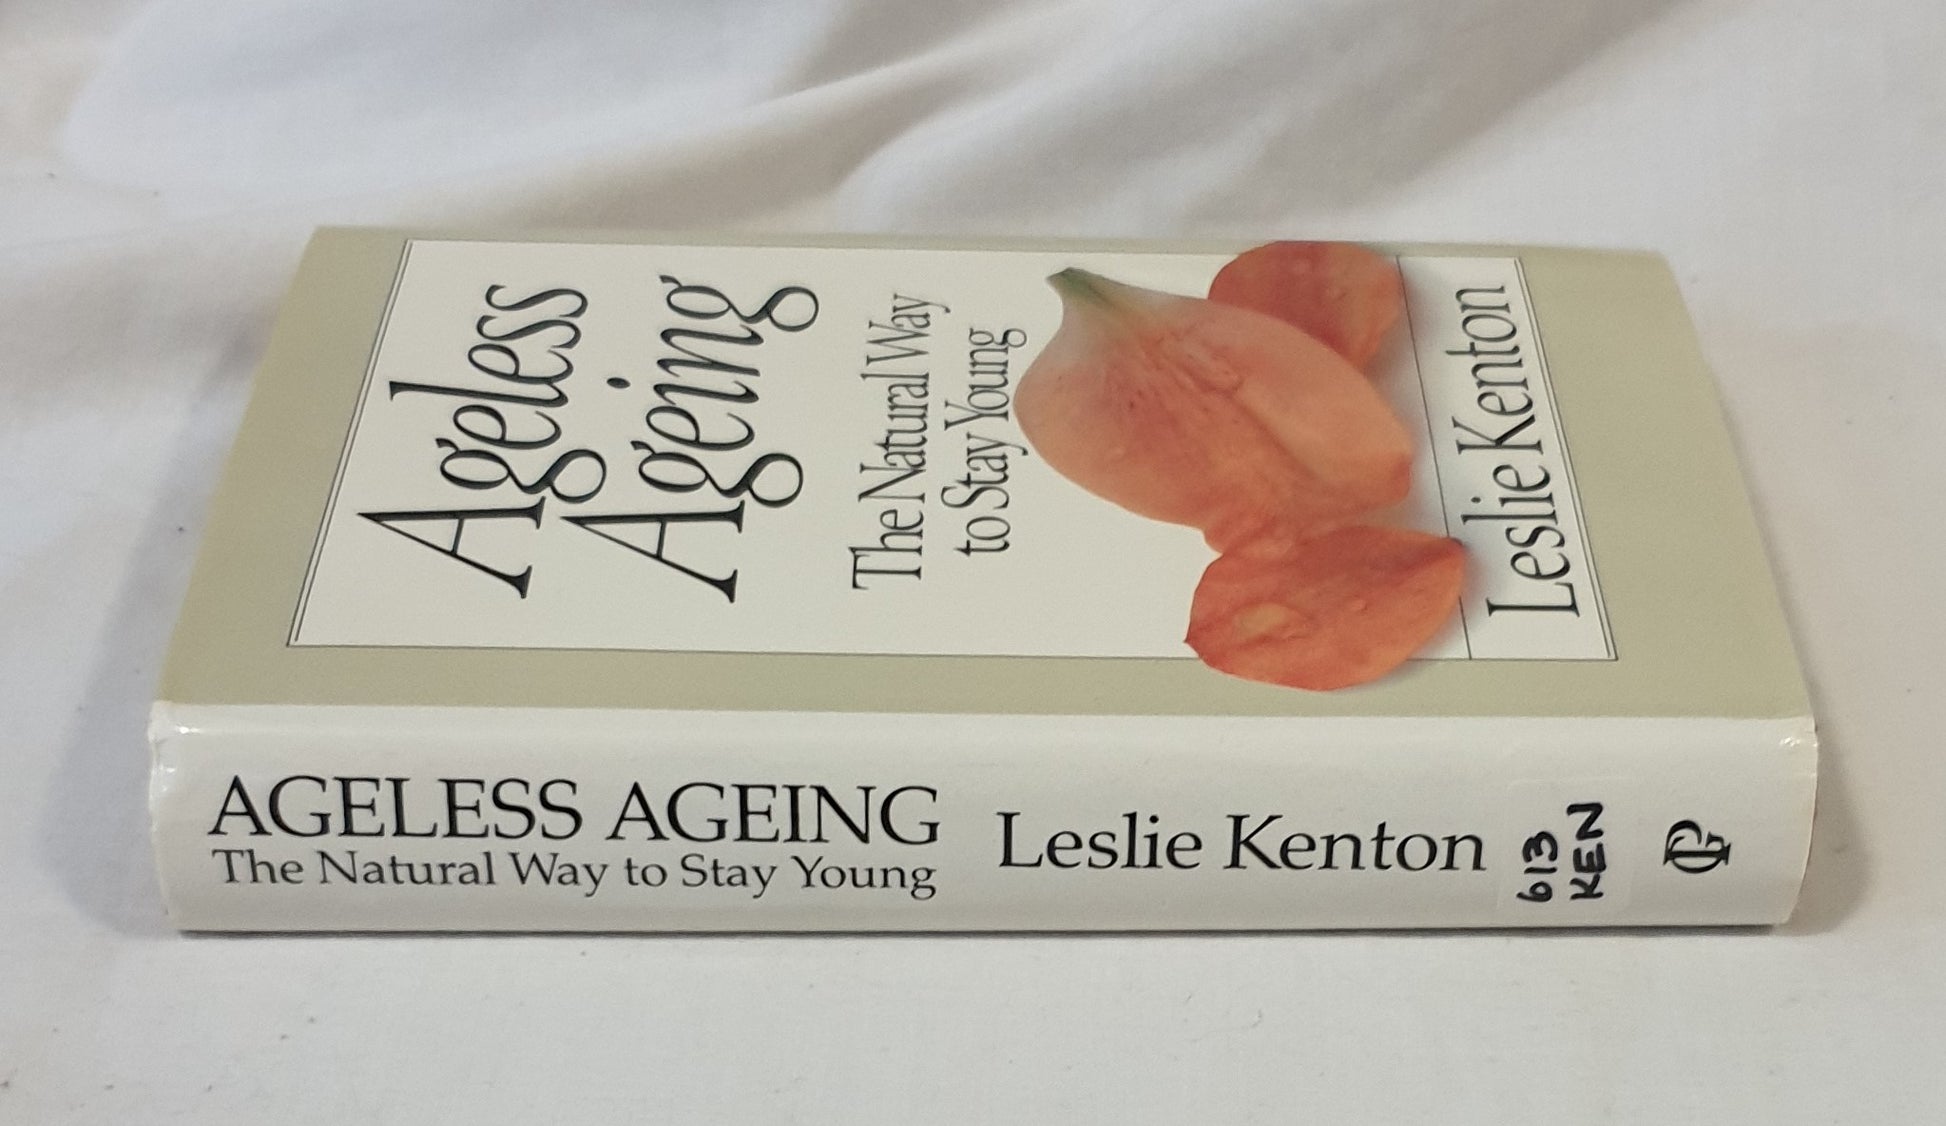 Ageless Ageing  The Natural Way to Stay Young  by Leslie Kenton